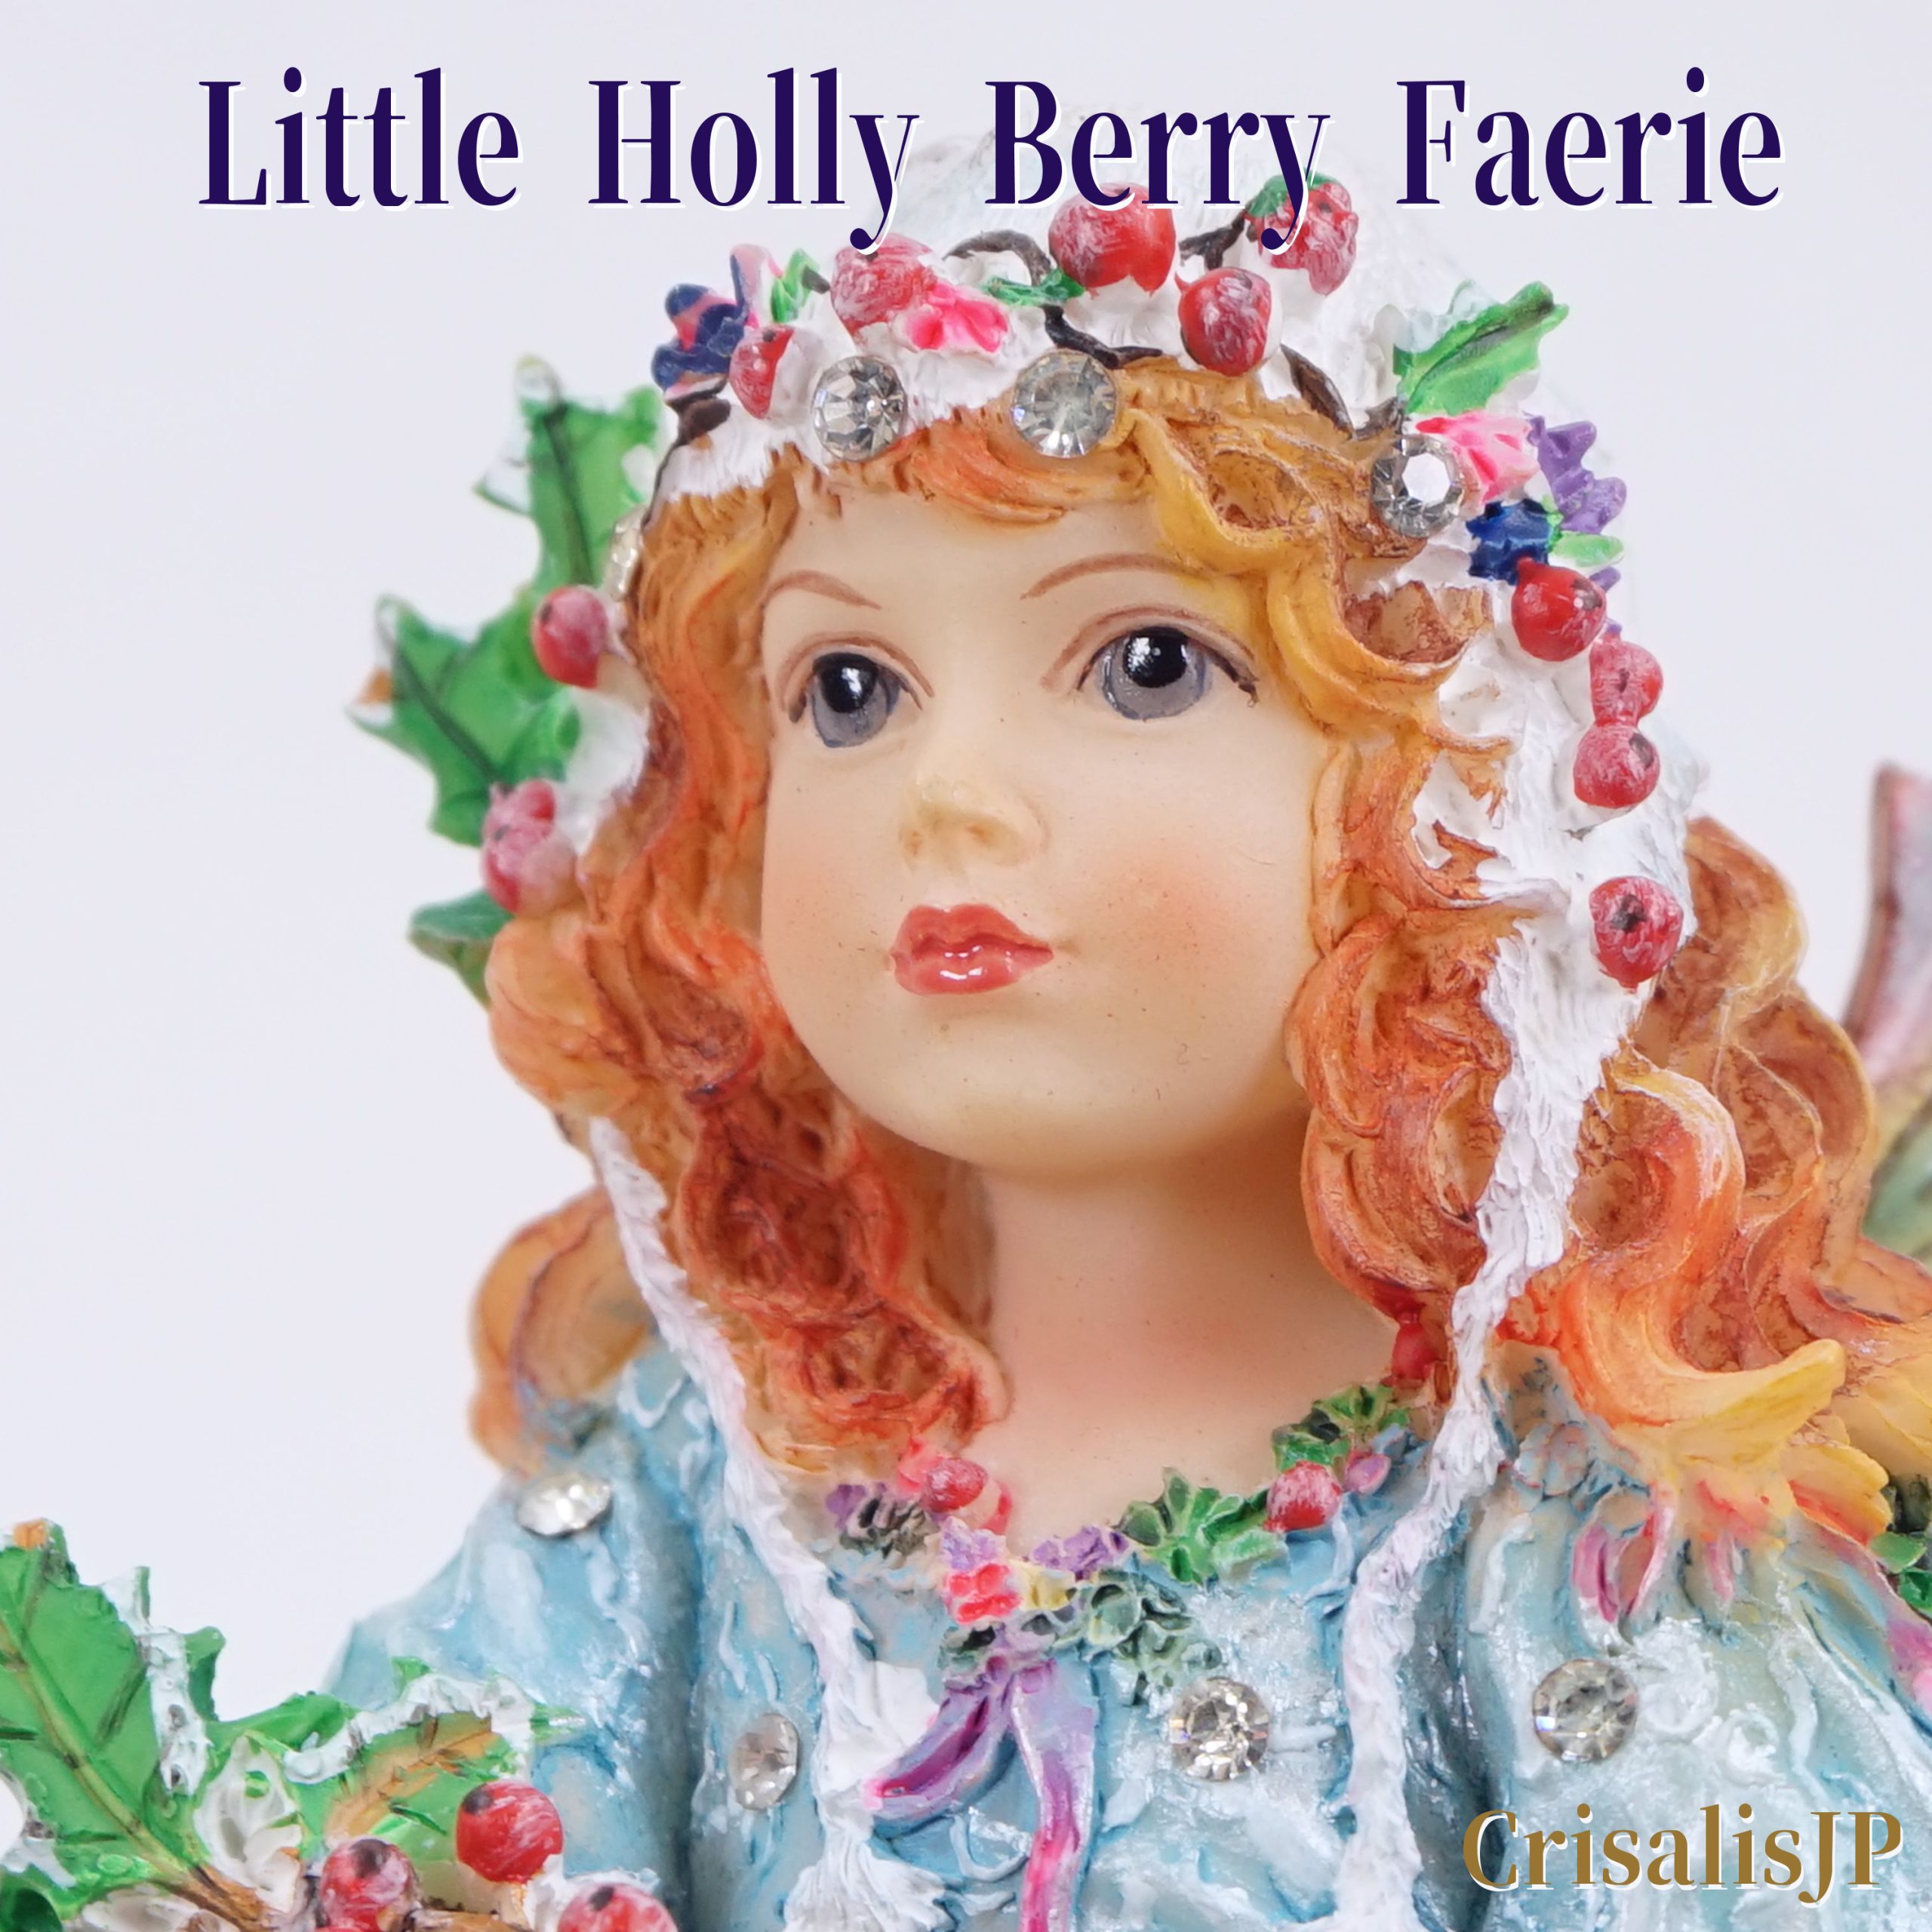 Little Holly Berry Faerie